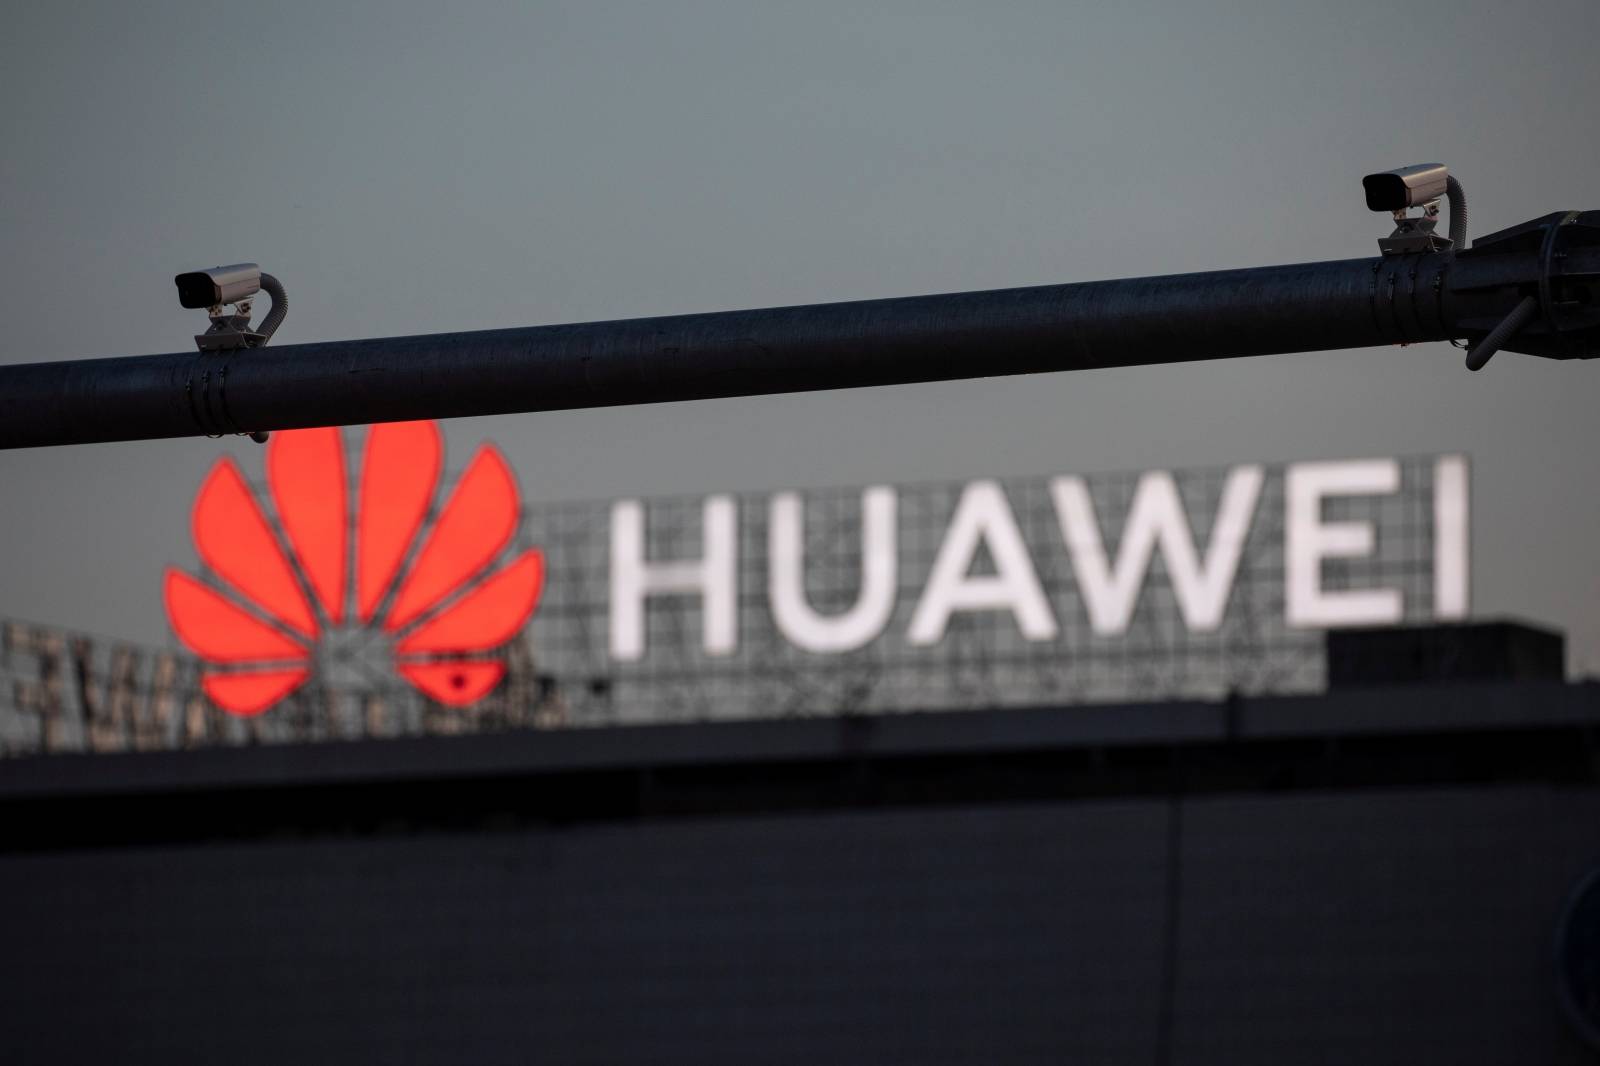 Surveillance cameras are seen in front of a Huawei logo in Belgrade